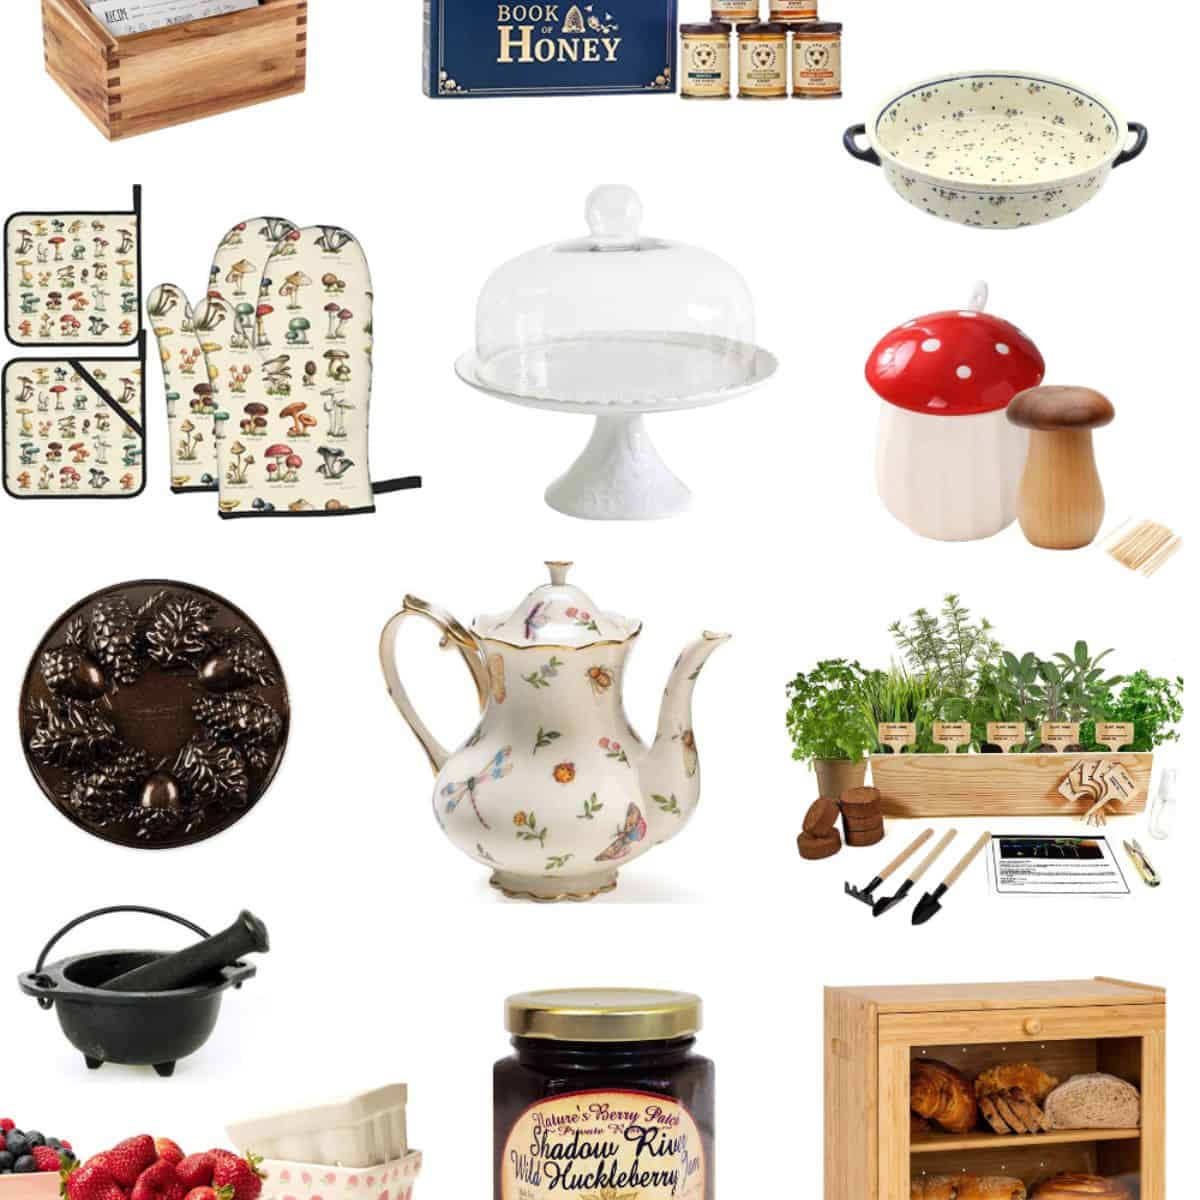 graphic with oven mitts with mushrooms, a cake pan with pine cones, a cauldron mortar and pestle, a vintage tea pot, a white porcelain cake stand, a small herb garden, a small ceramic mushroom, a small wooden bread box